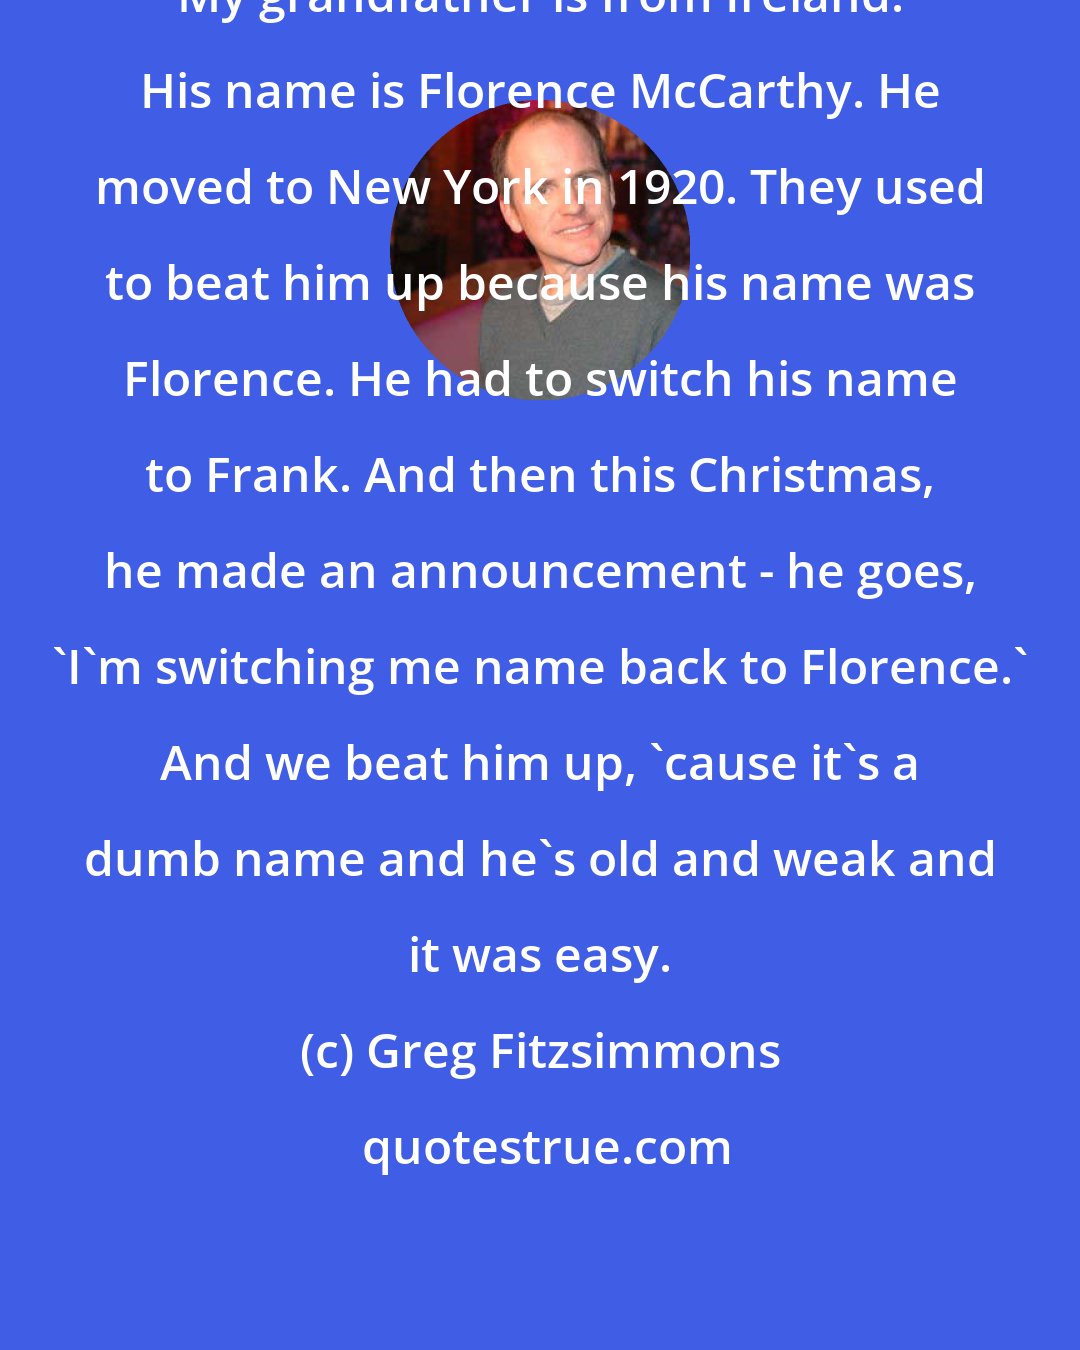 Greg Fitzsimmons: My grandfather is from Ireland. His name is Florence McCarthy. He moved to New York in 1920. They used to beat him up because his name was Florence. He had to switch his name to Frank. And then this Christmas, he made an announcement - he goes, 'I'm switching me name back to Florence.' And we beat him up, 'cause it's a dumb name and he's old and weak and it was easy.